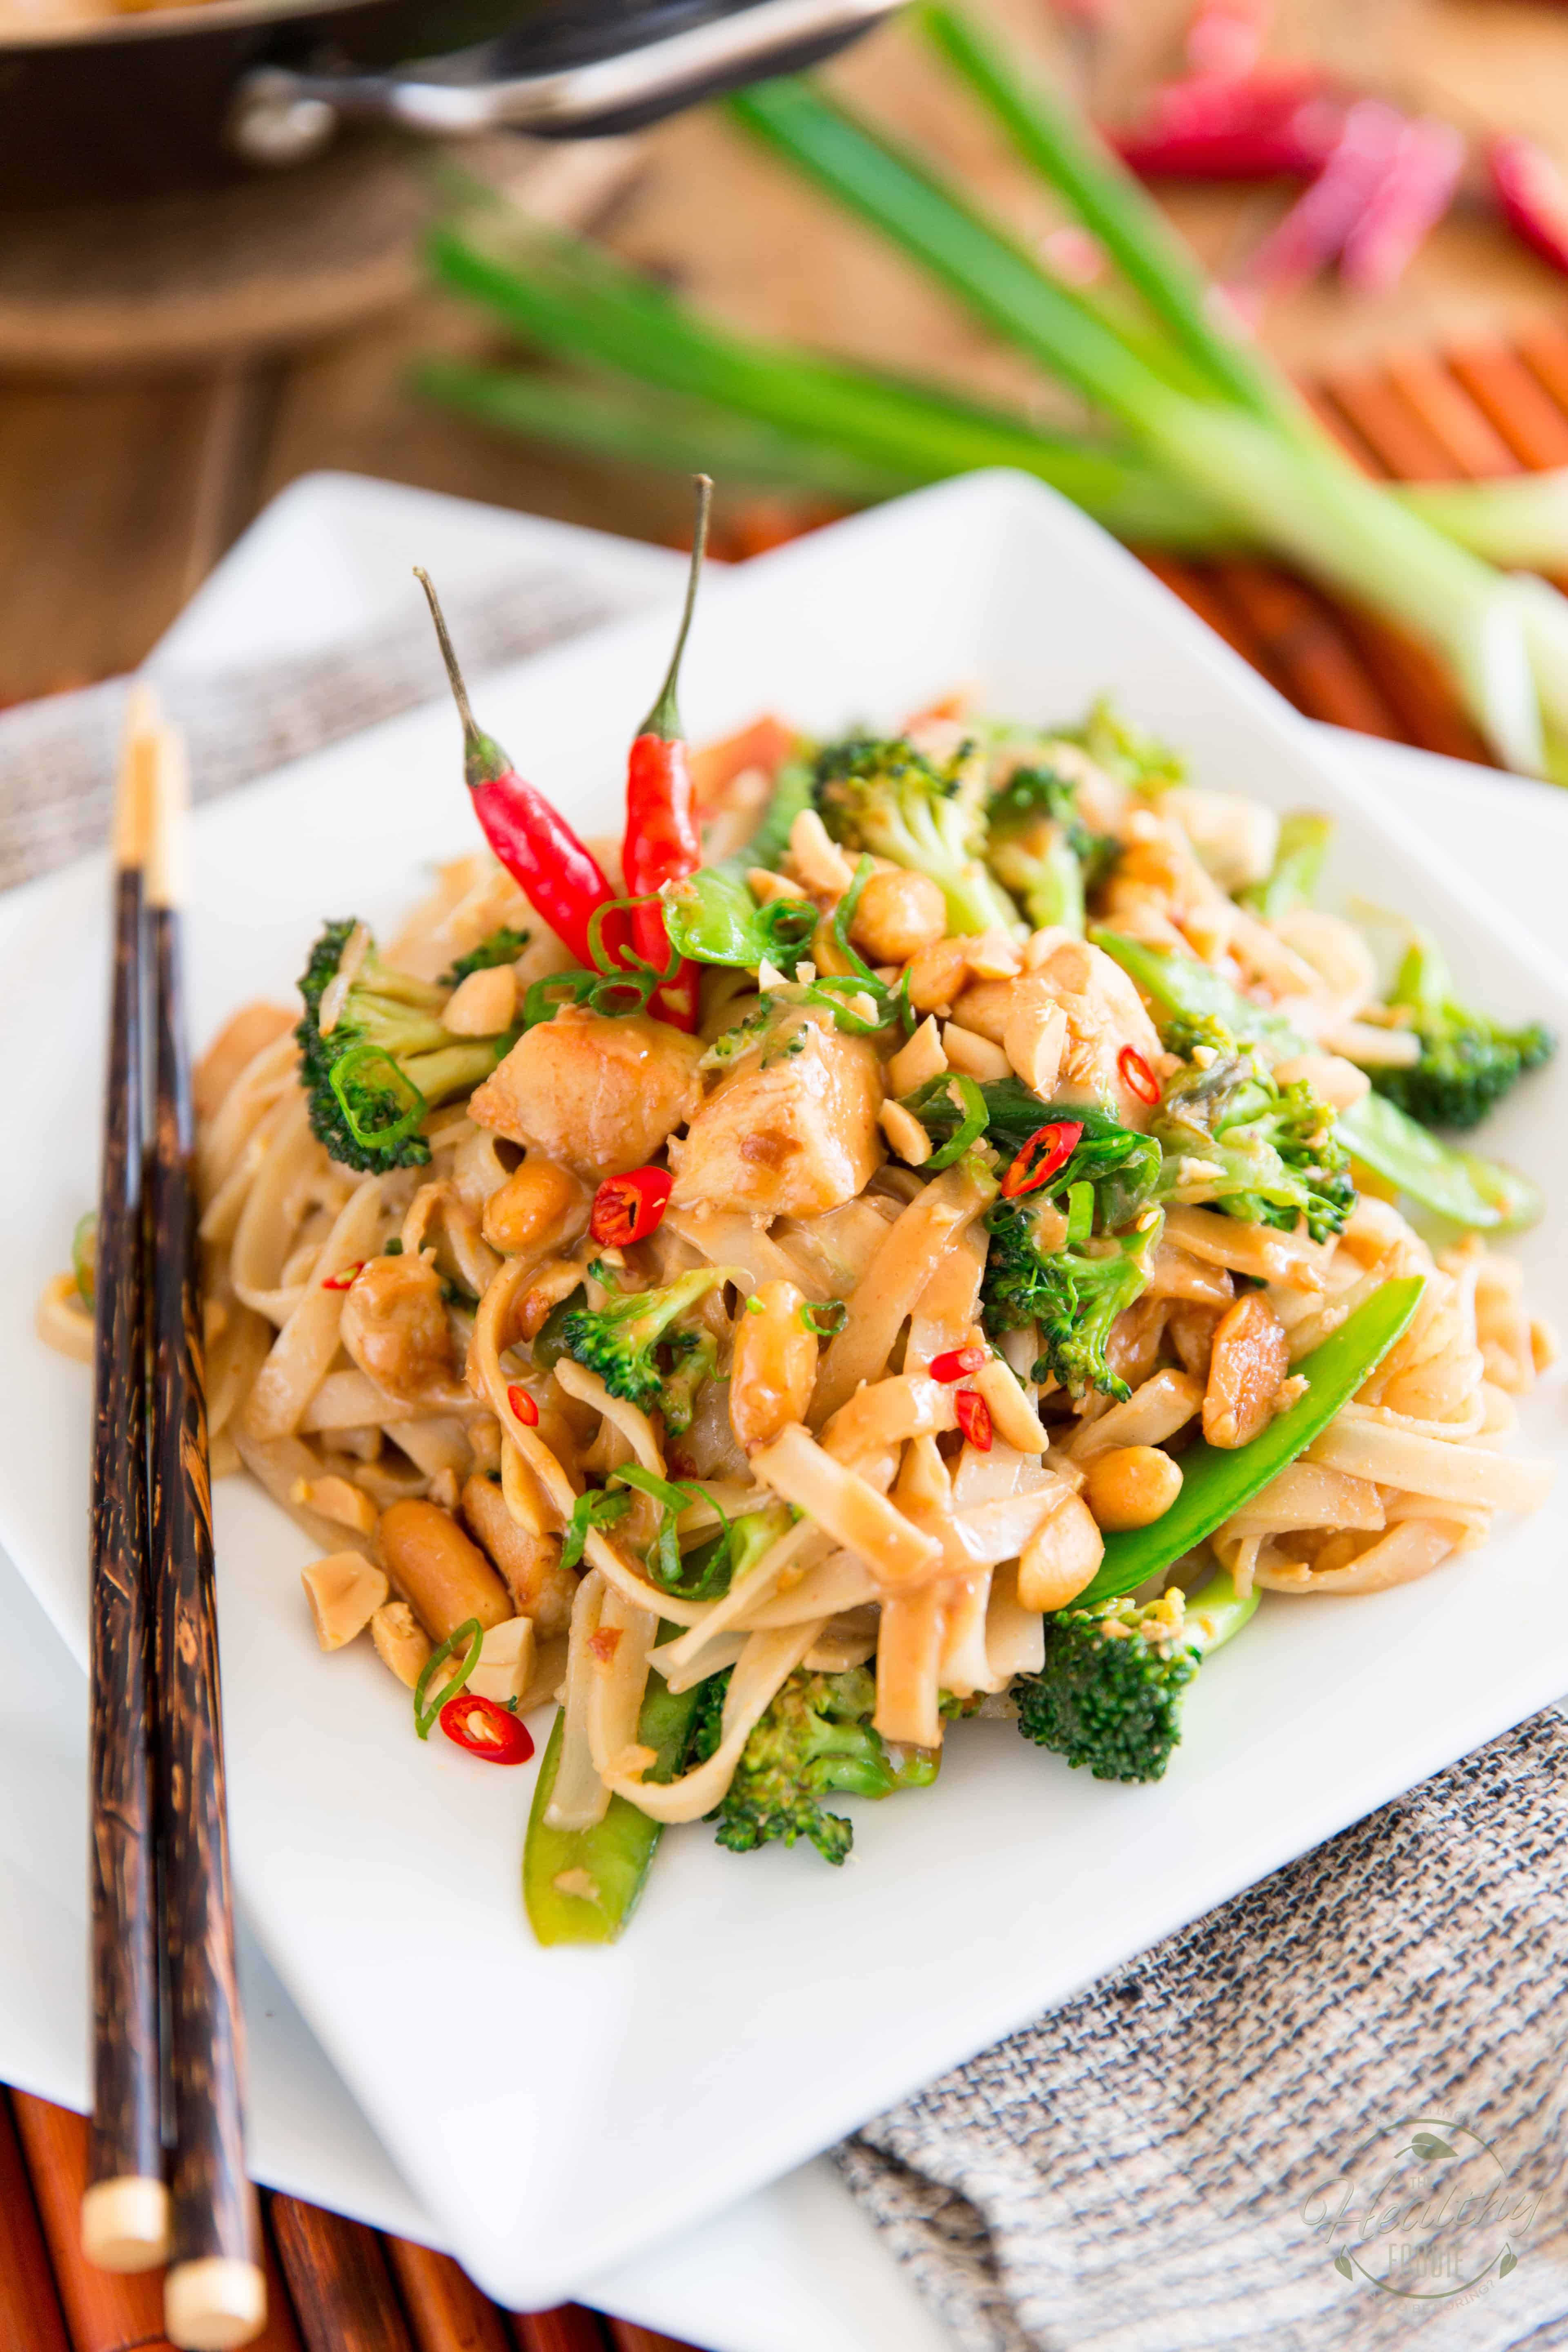 This spicy peanut chicken noodle dish is loaded with tasty morsels of chicken, crunchy veggies and soft rice noodles, all wrapped up in a rich and spicy peanut sauce.  